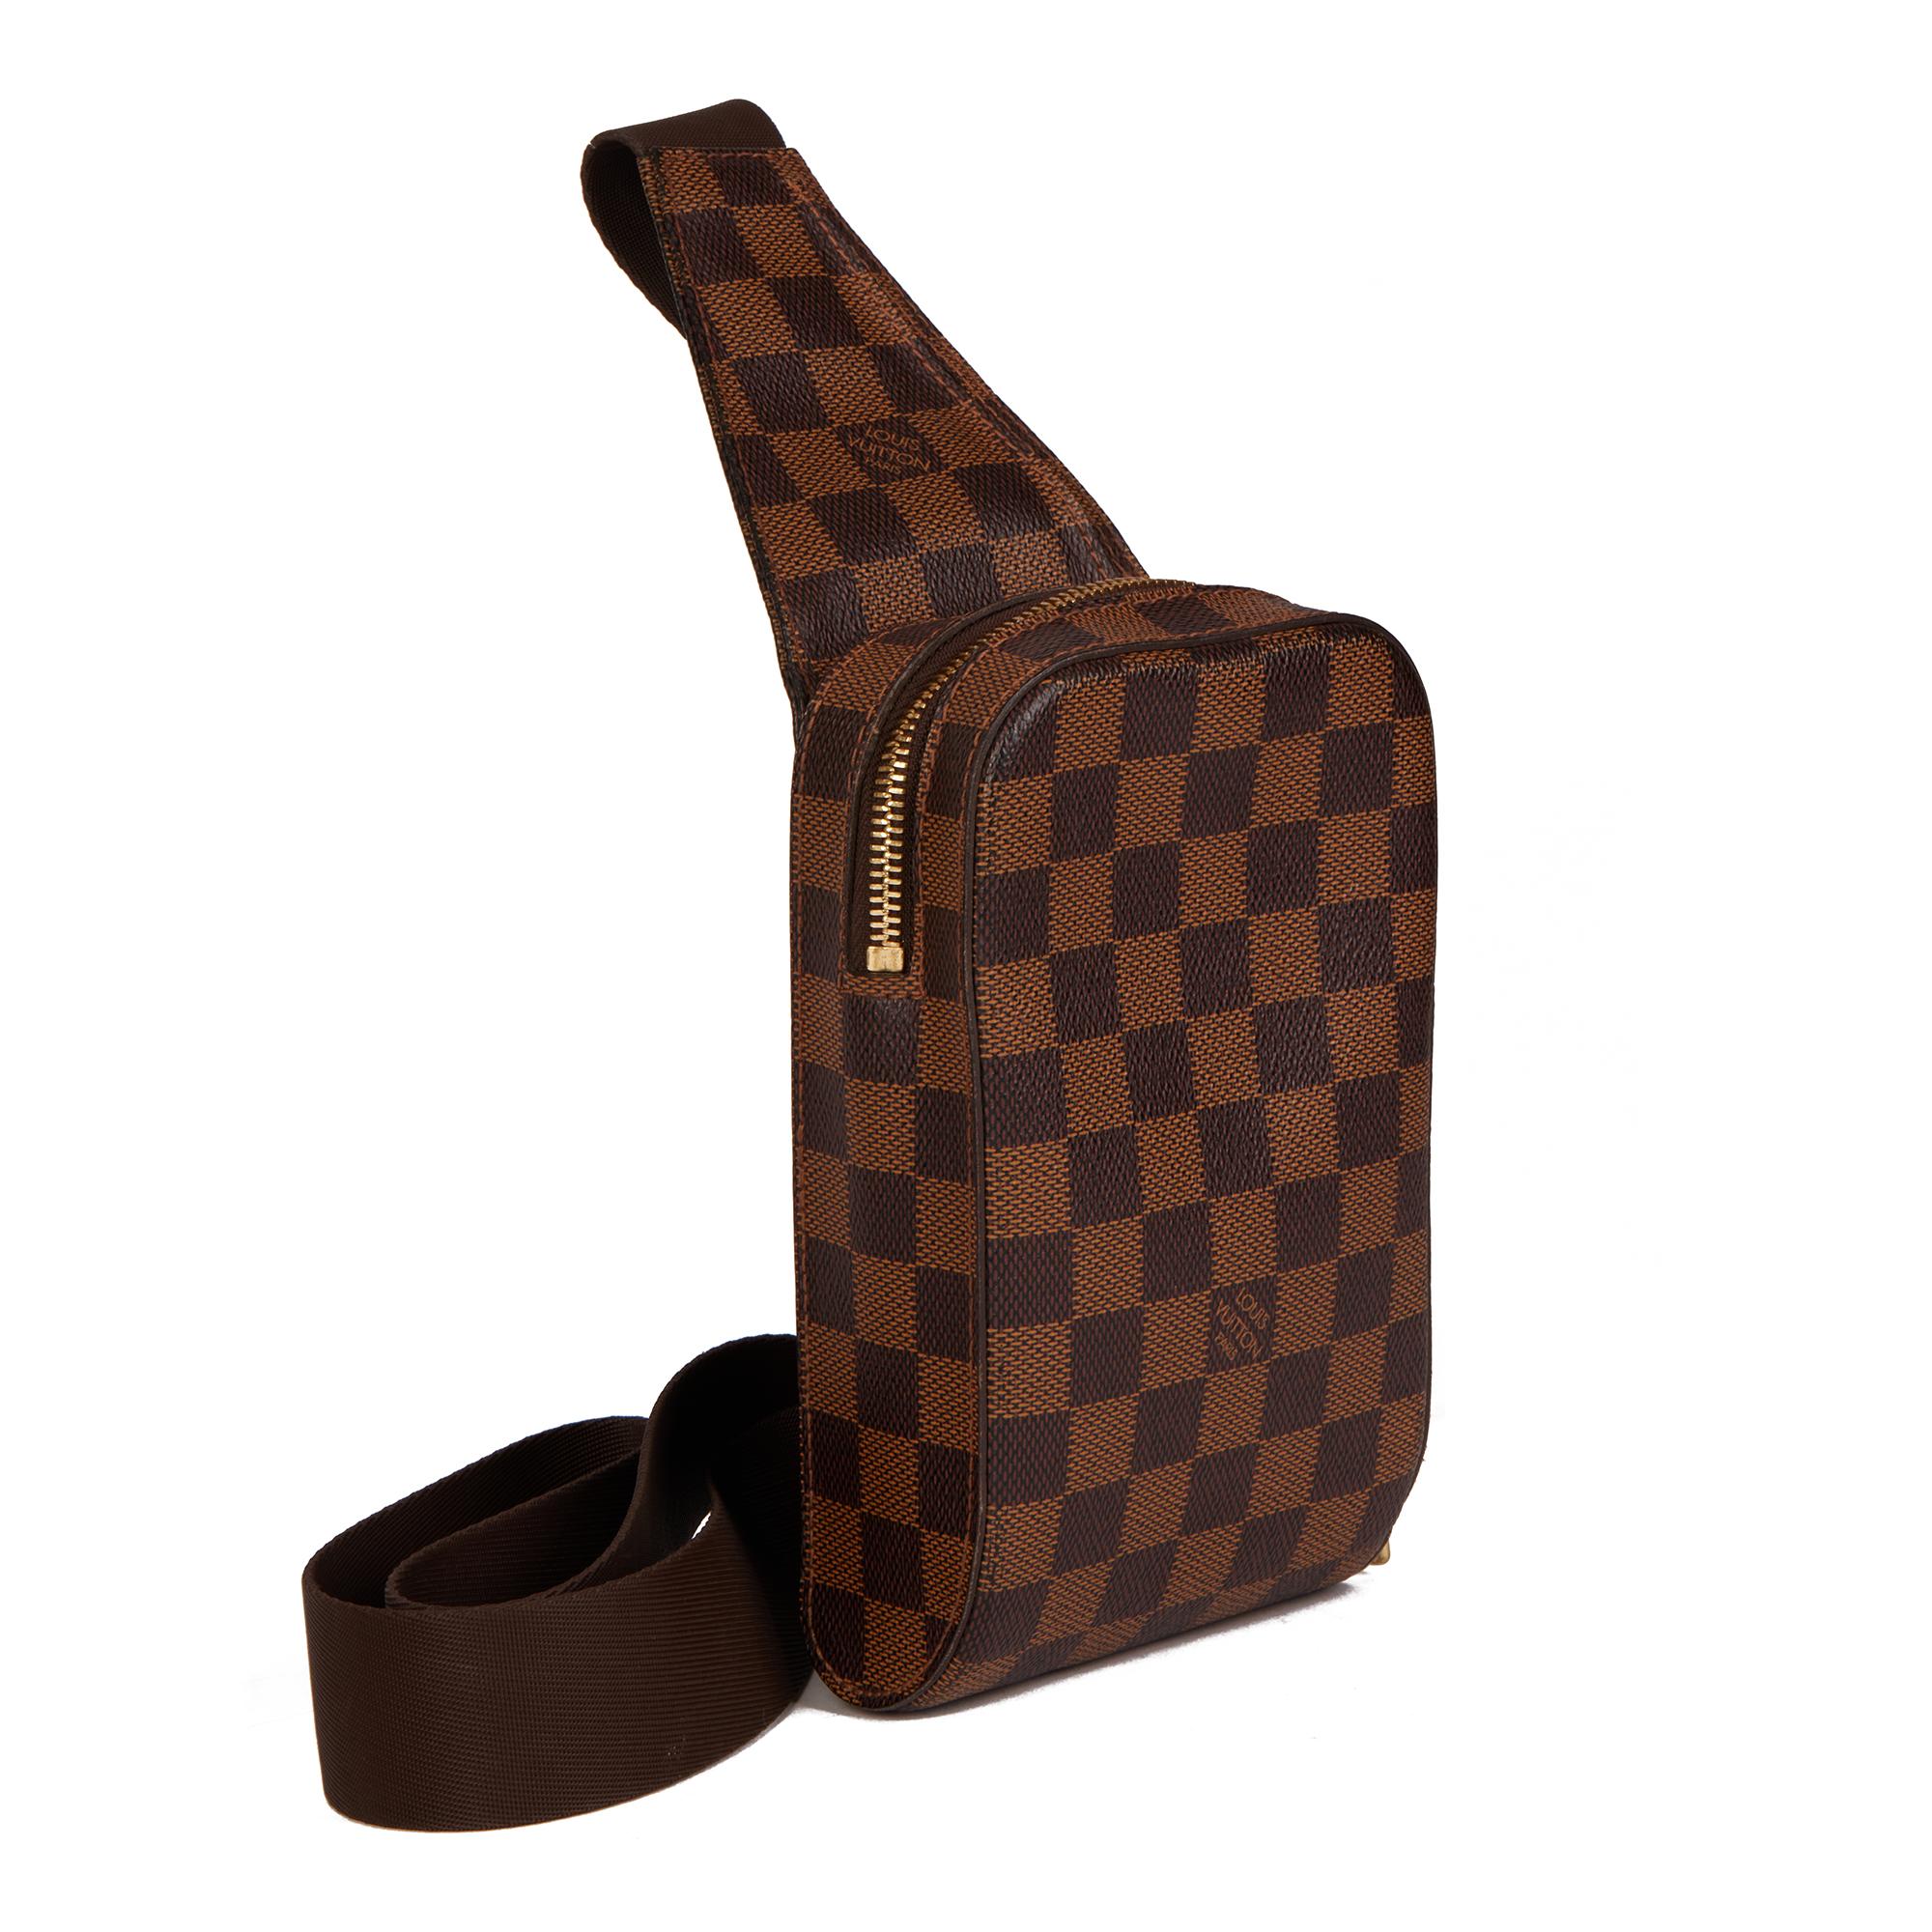 LOUIS VUITTON
Brown Damier Ebene Coated Canvas Geronimos

Xupes Reference: HB4356
Serial Number: CA 4104
Age (Circa): 2014
Accompanied By: Louis Vuitton Invoice & Receipt
Authenticity Details: Date Stamp (Made in Spain)
Gender: Unisex
Type: